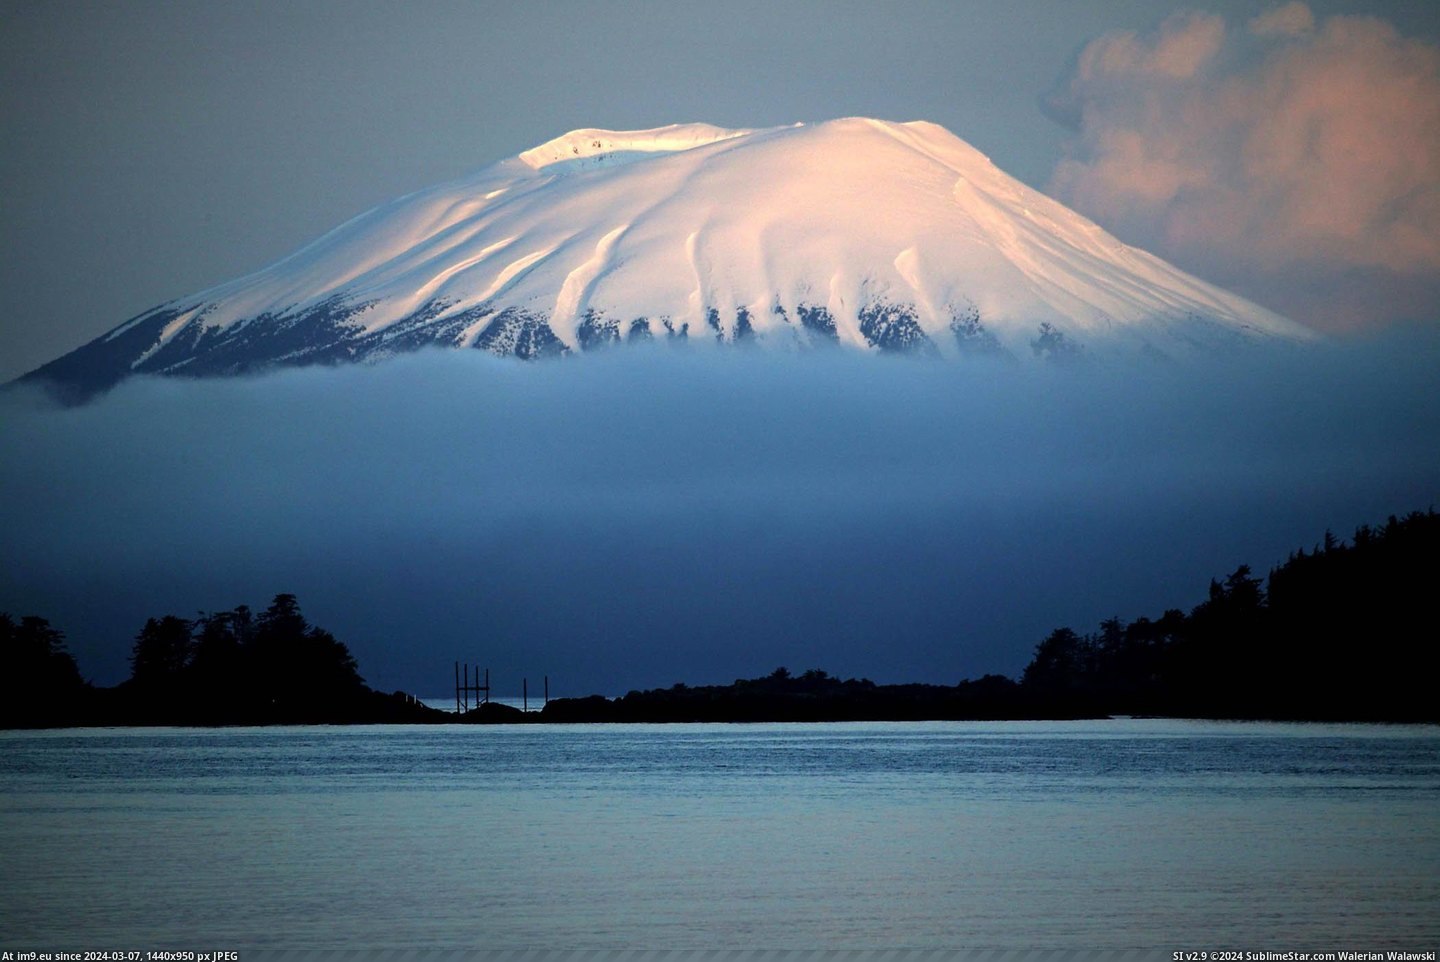 #Out #Mount #Sitka #Edgecumbe #Fog #Rising [Earthporn] Mount Edgecumbe rising out of the fog (Sitka, AK) [2100x1397] Pic. (Bild von album My r/EARTHPORN favs))